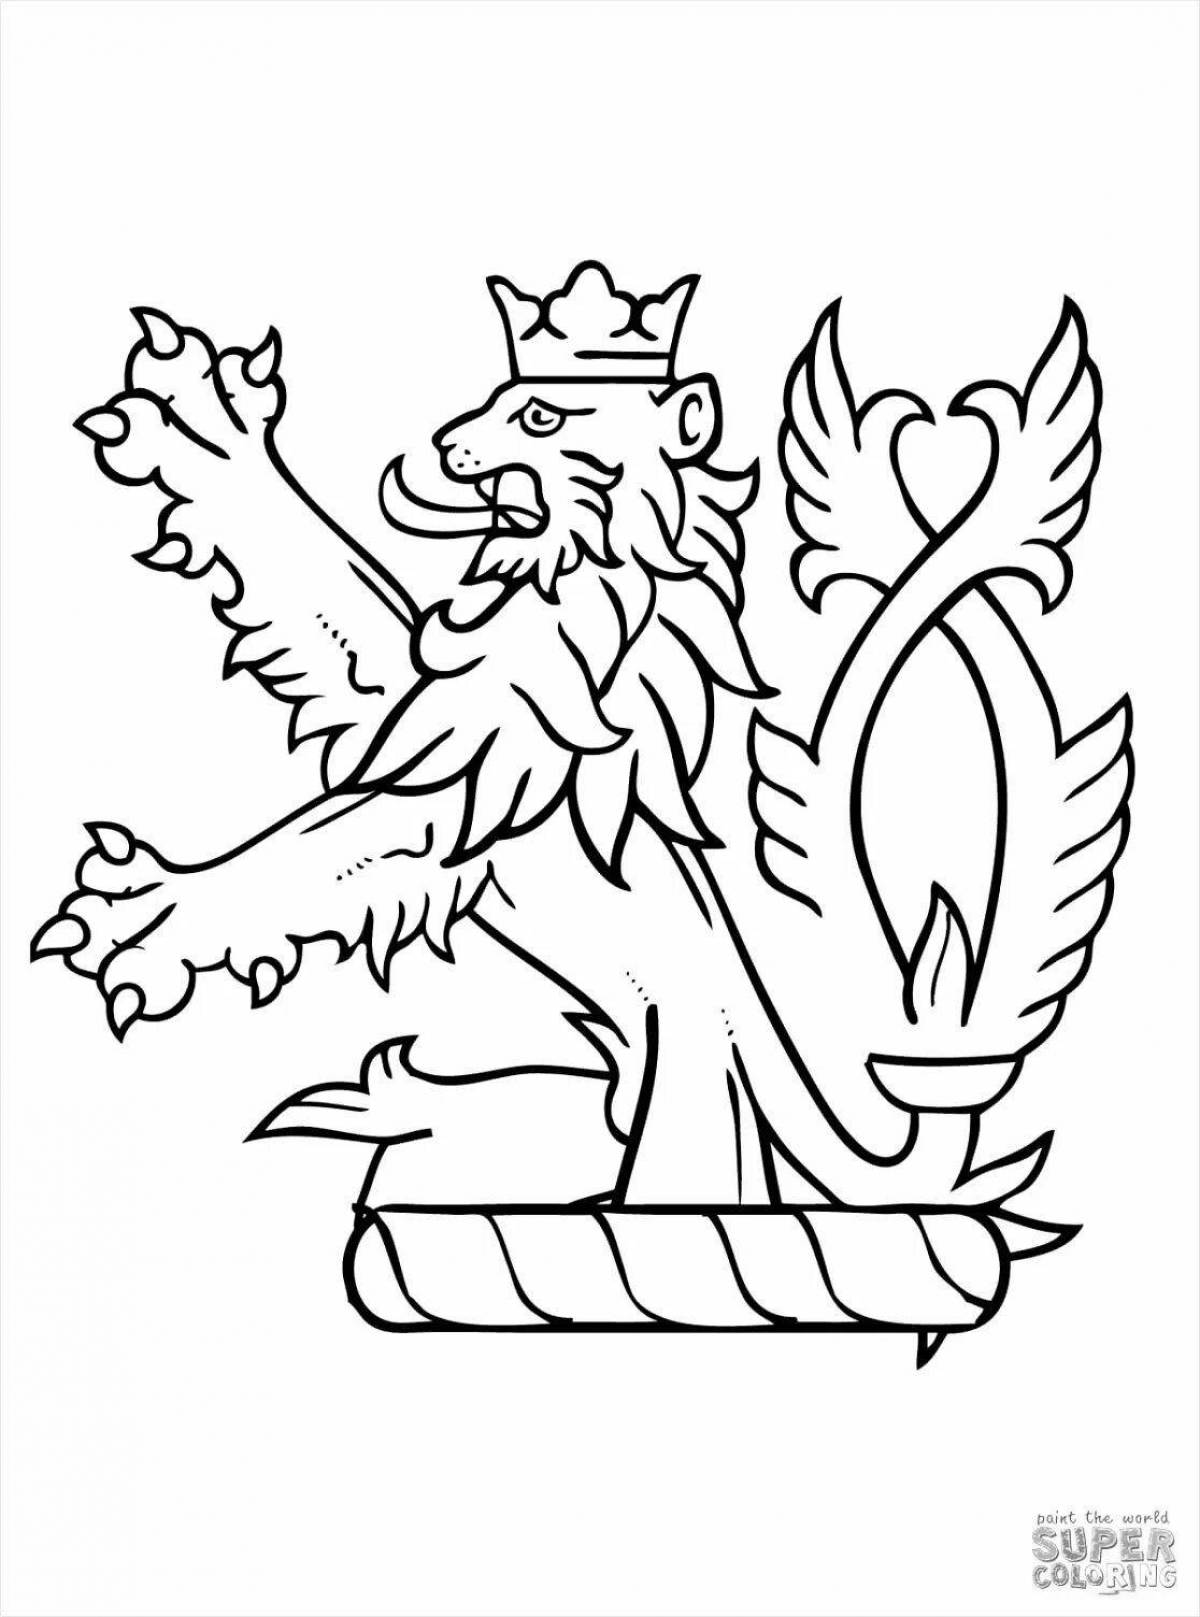 Scotland holiday coloring page